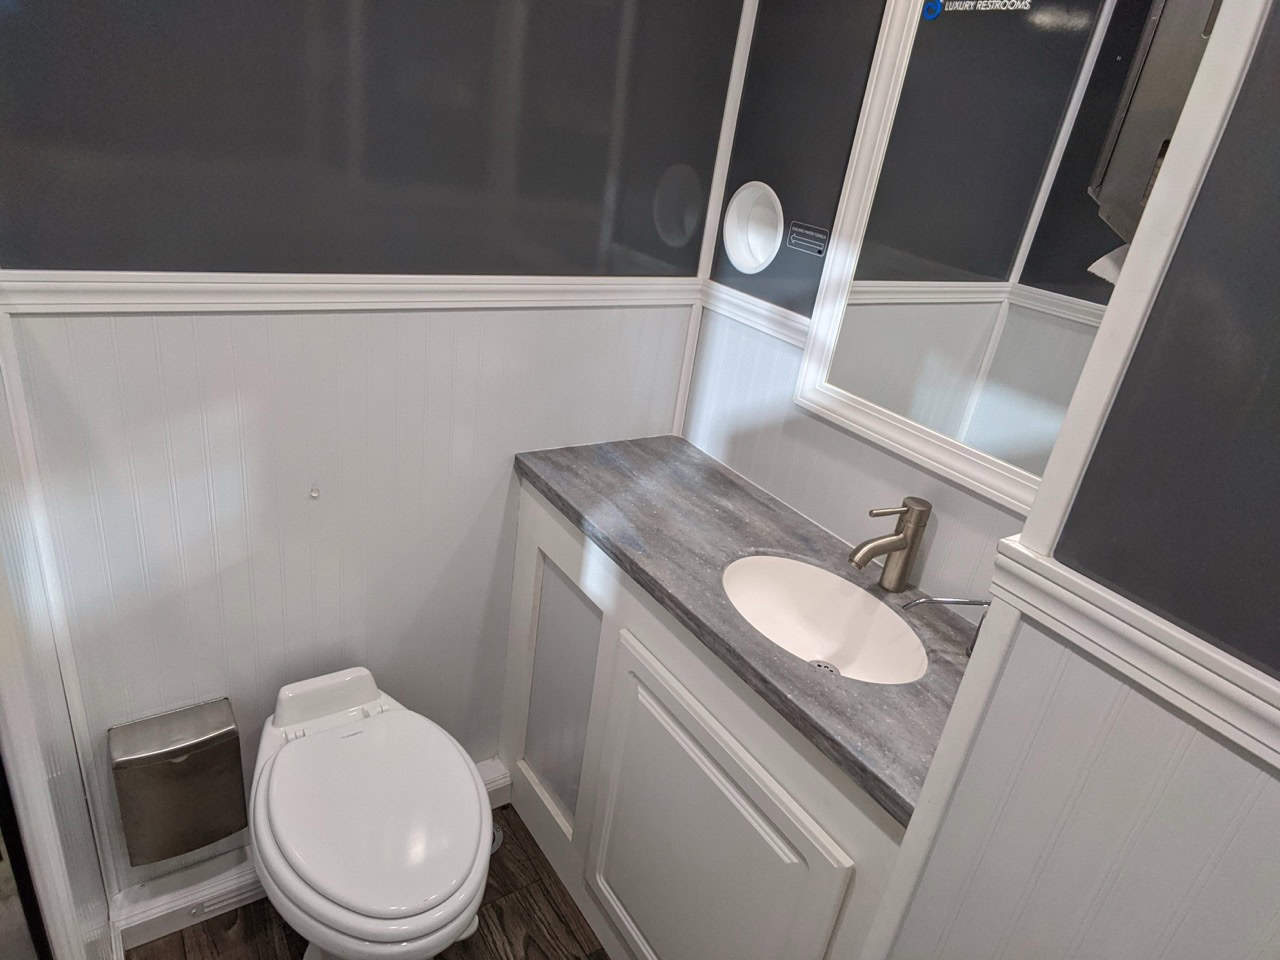 a small modern 2 stall restroom trailer rental with white walls, a gray vanity with an integrated sink, a toilet, and a mirrored medicine cabinet.